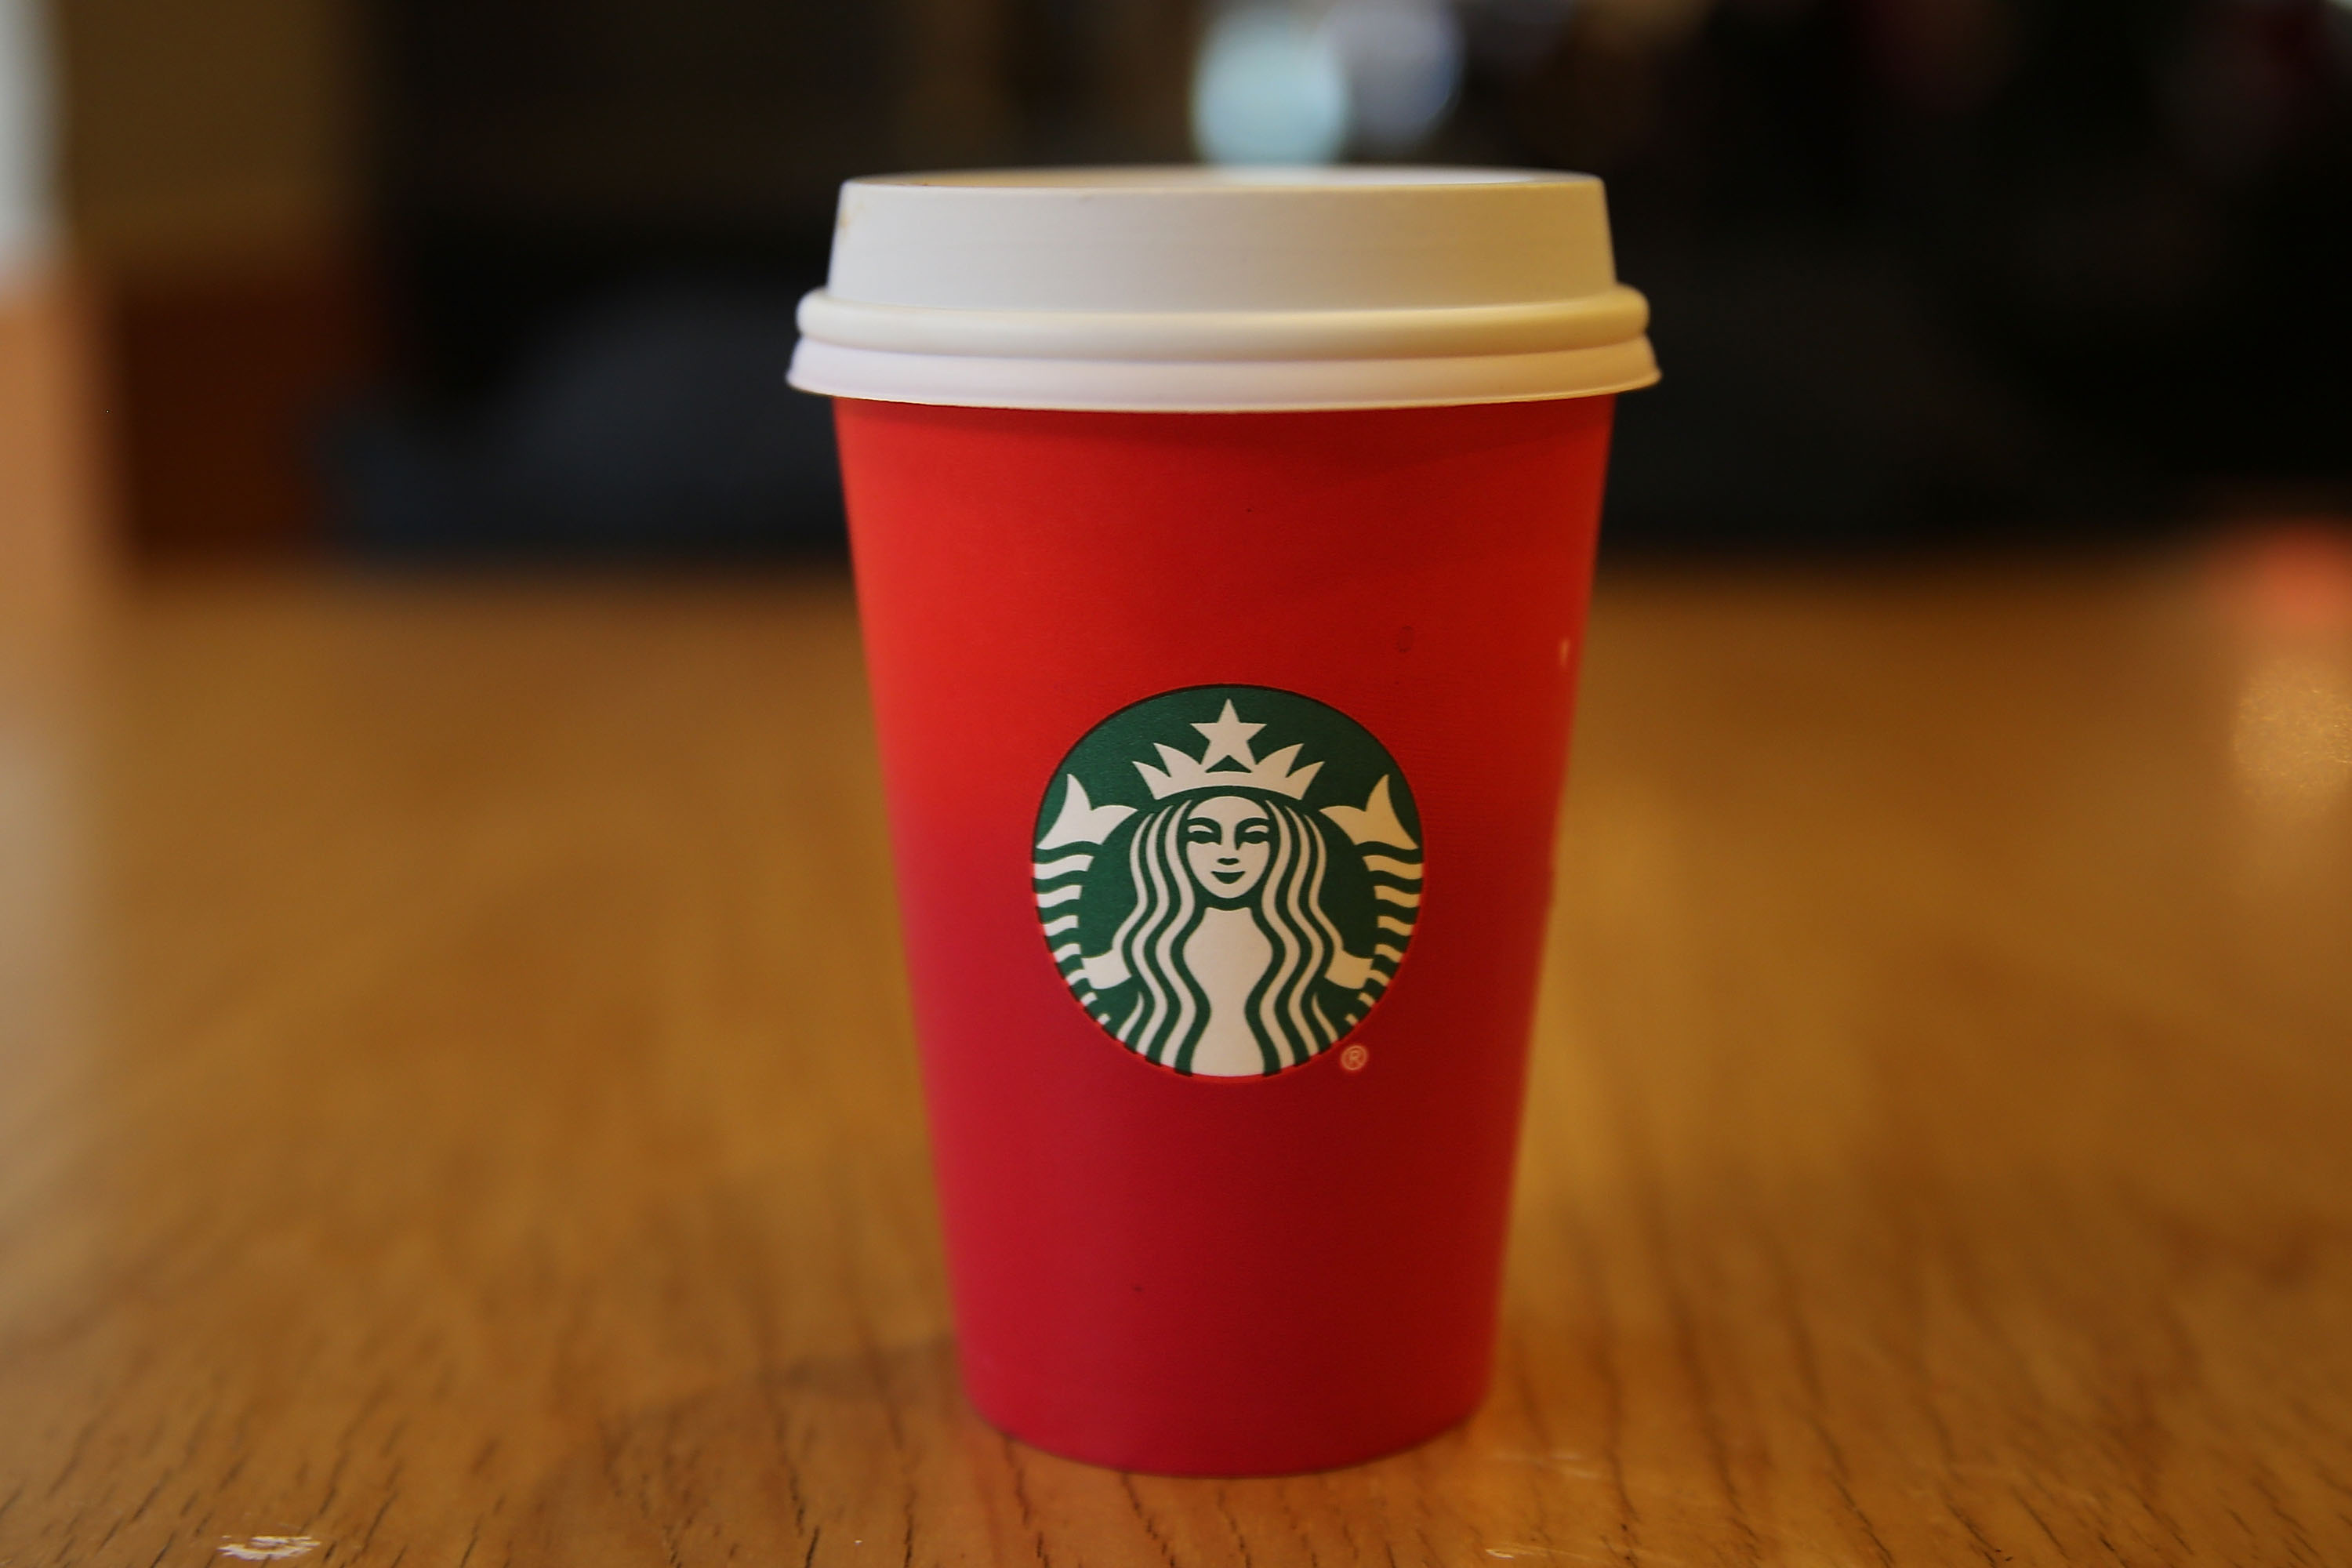 Even Starbucks Has Black Friday Deals This Year